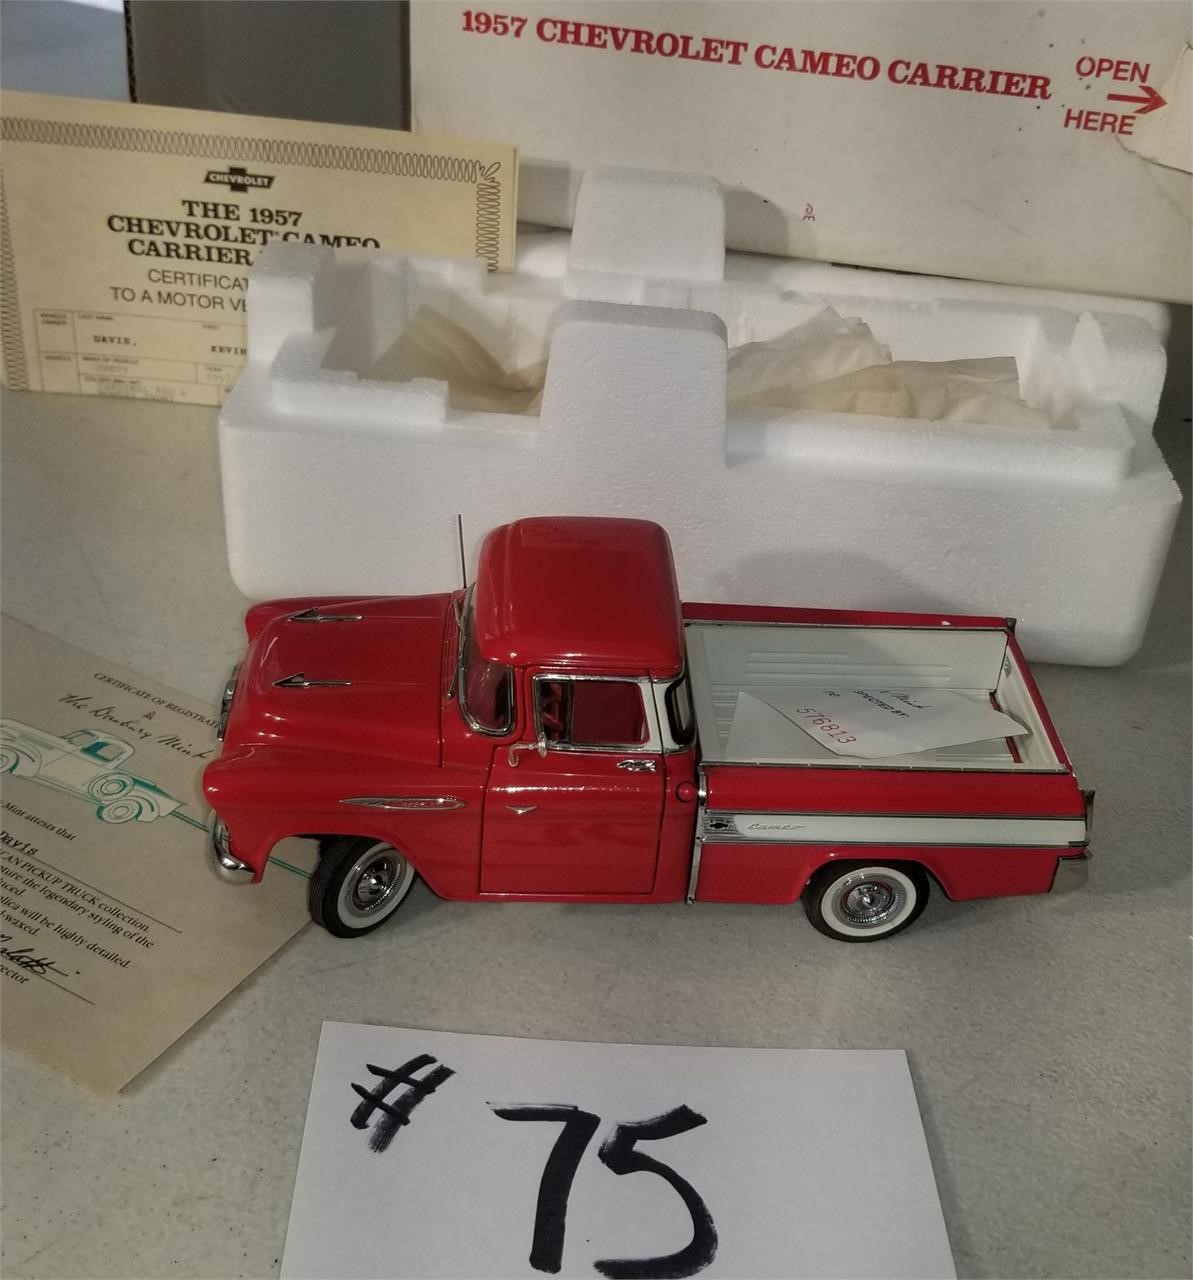 1957 Chevrolet Cameo Carrier Die Cast Pickup